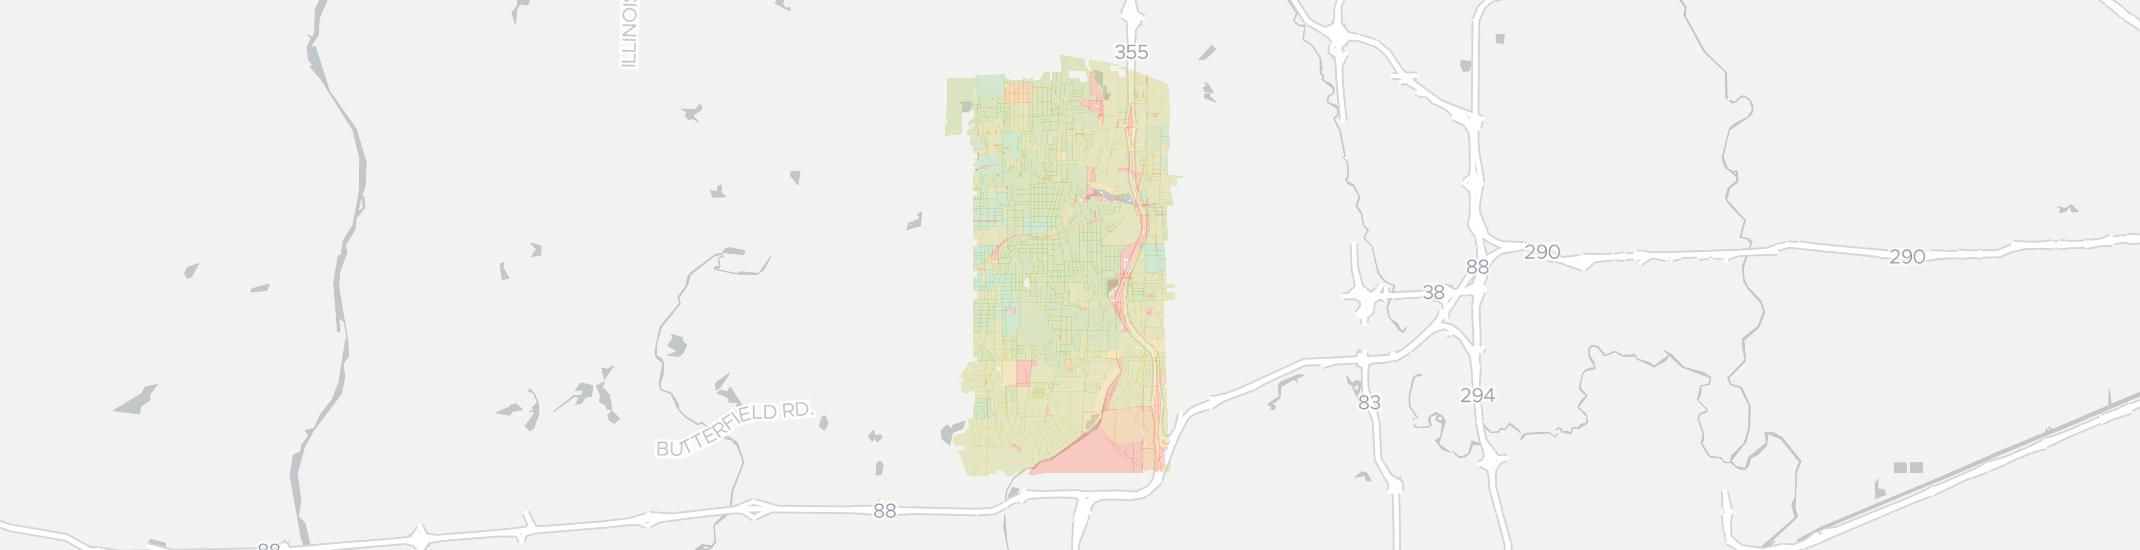 Glen Ellyn Internet Competition Map. Click for interactive map.